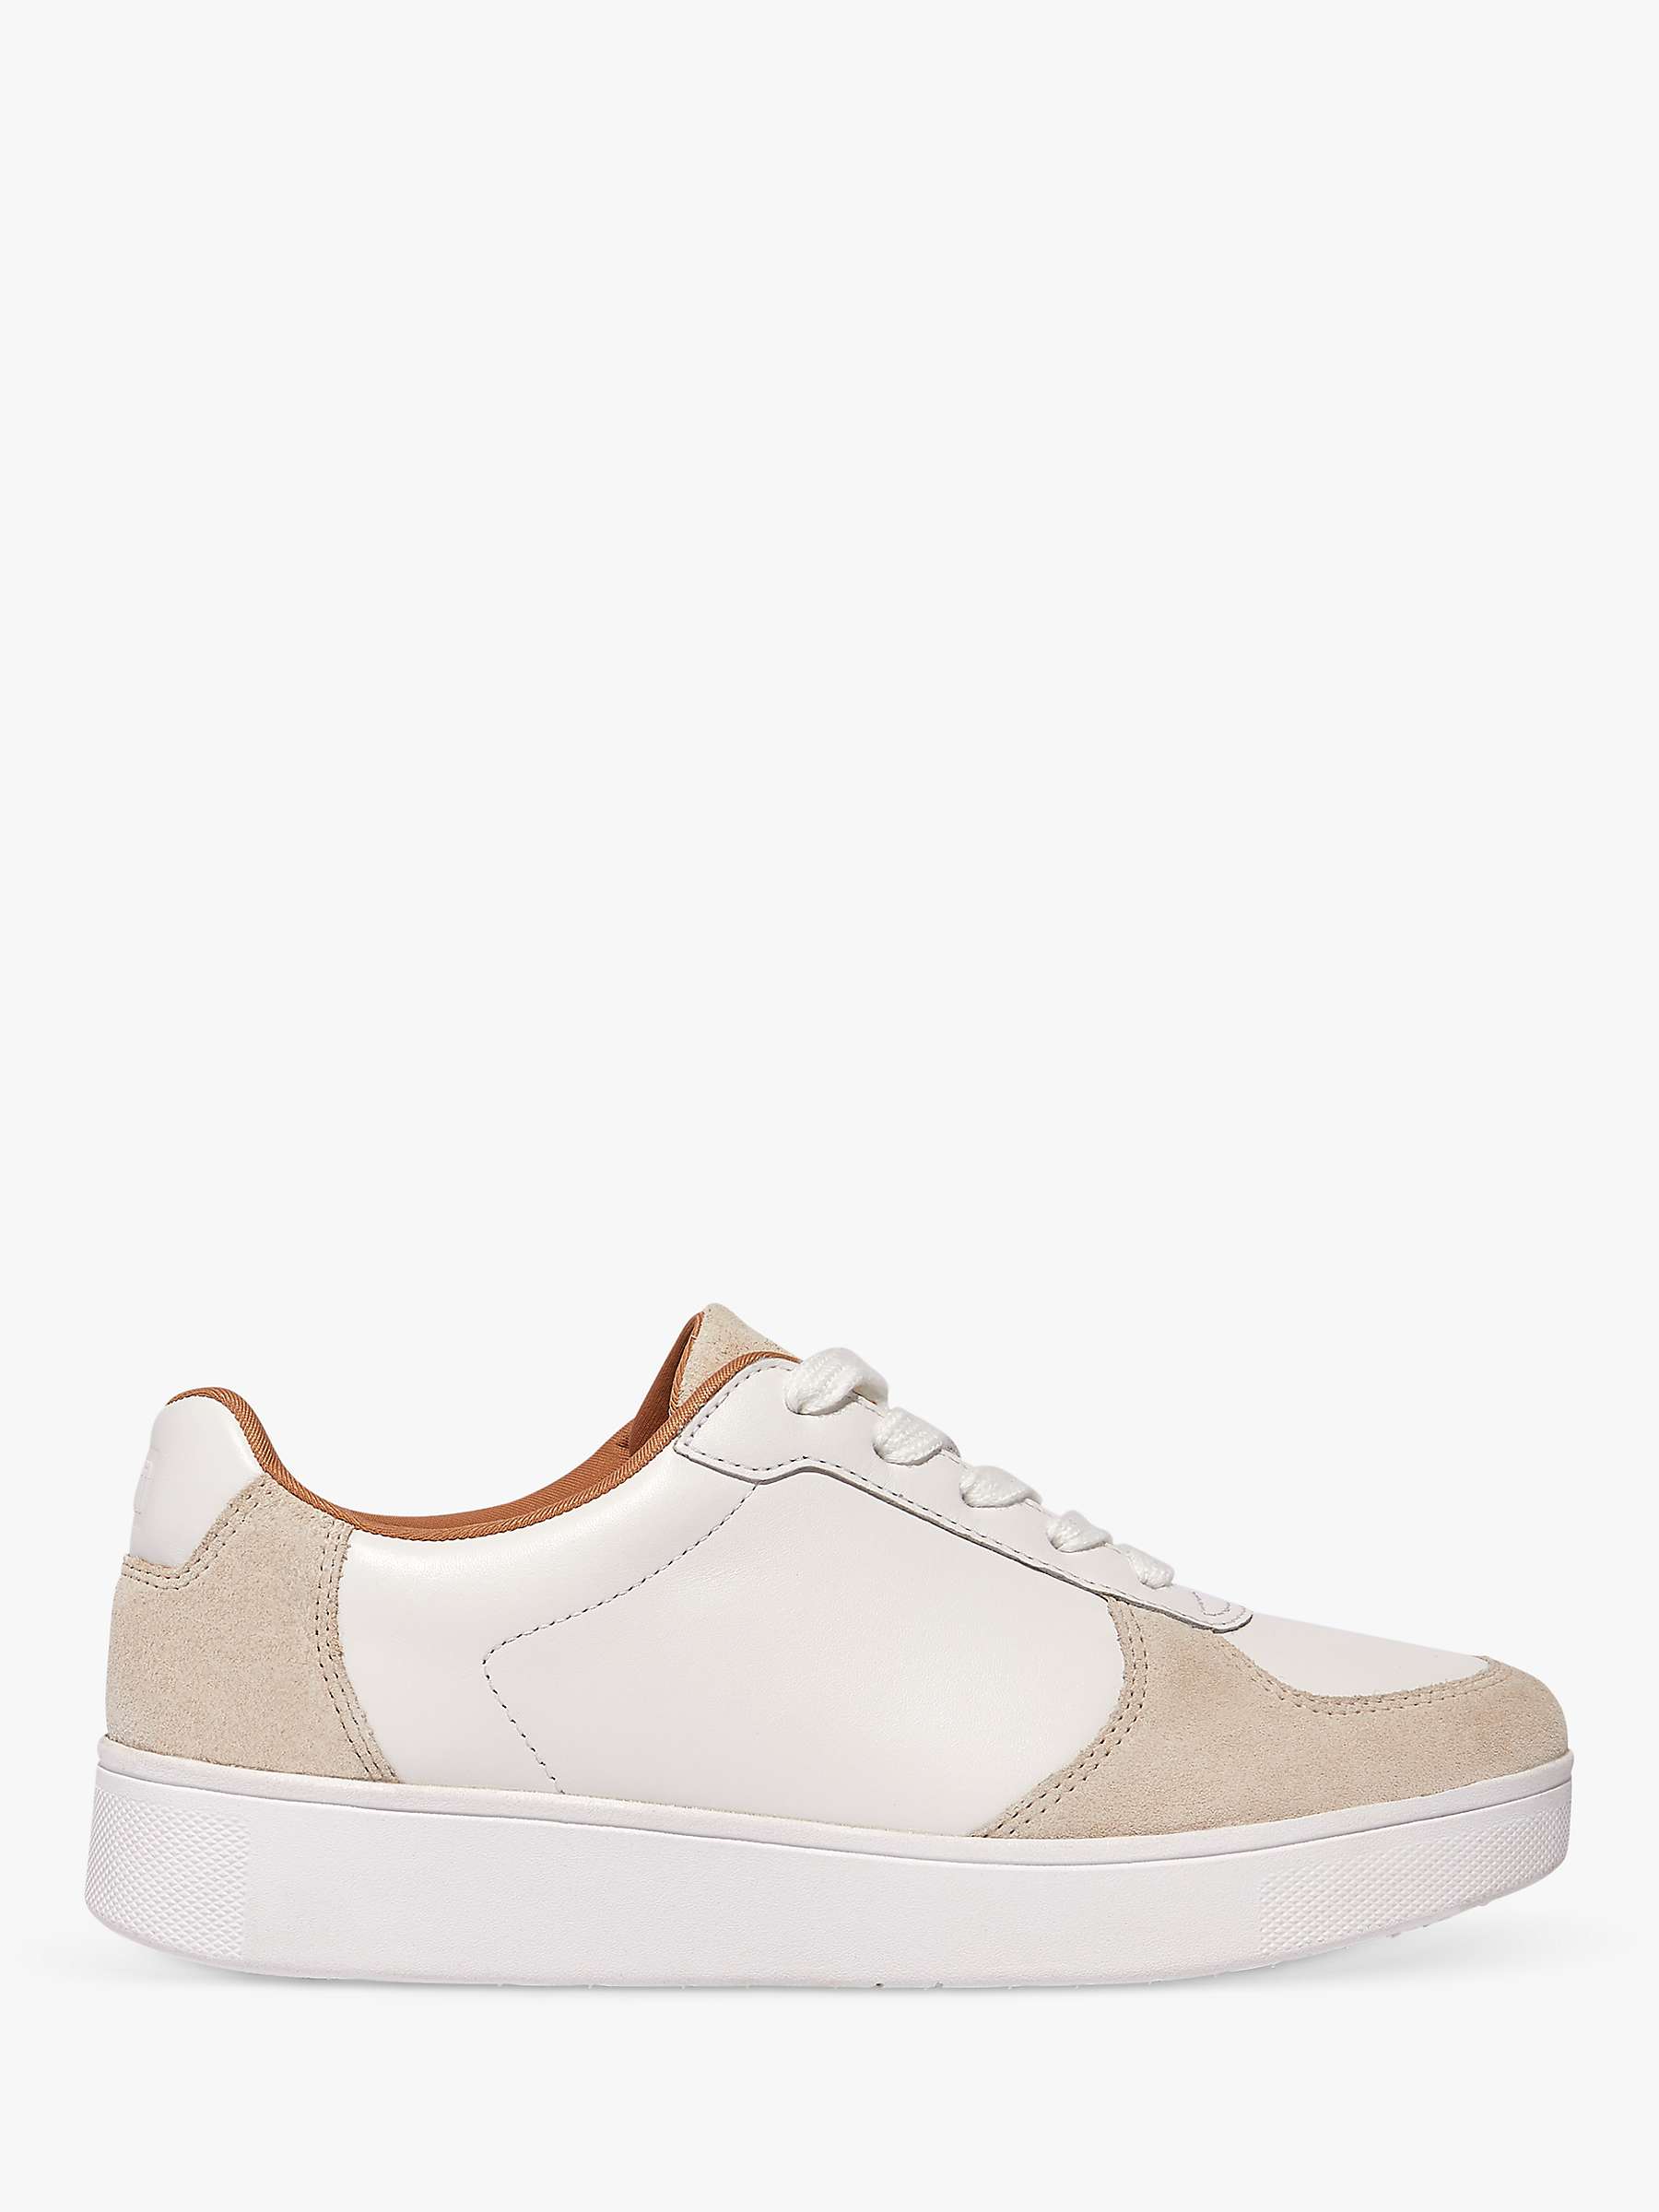 Buy FitFlop Rally Leather Lace Up Trainers Online at johnlewis.com